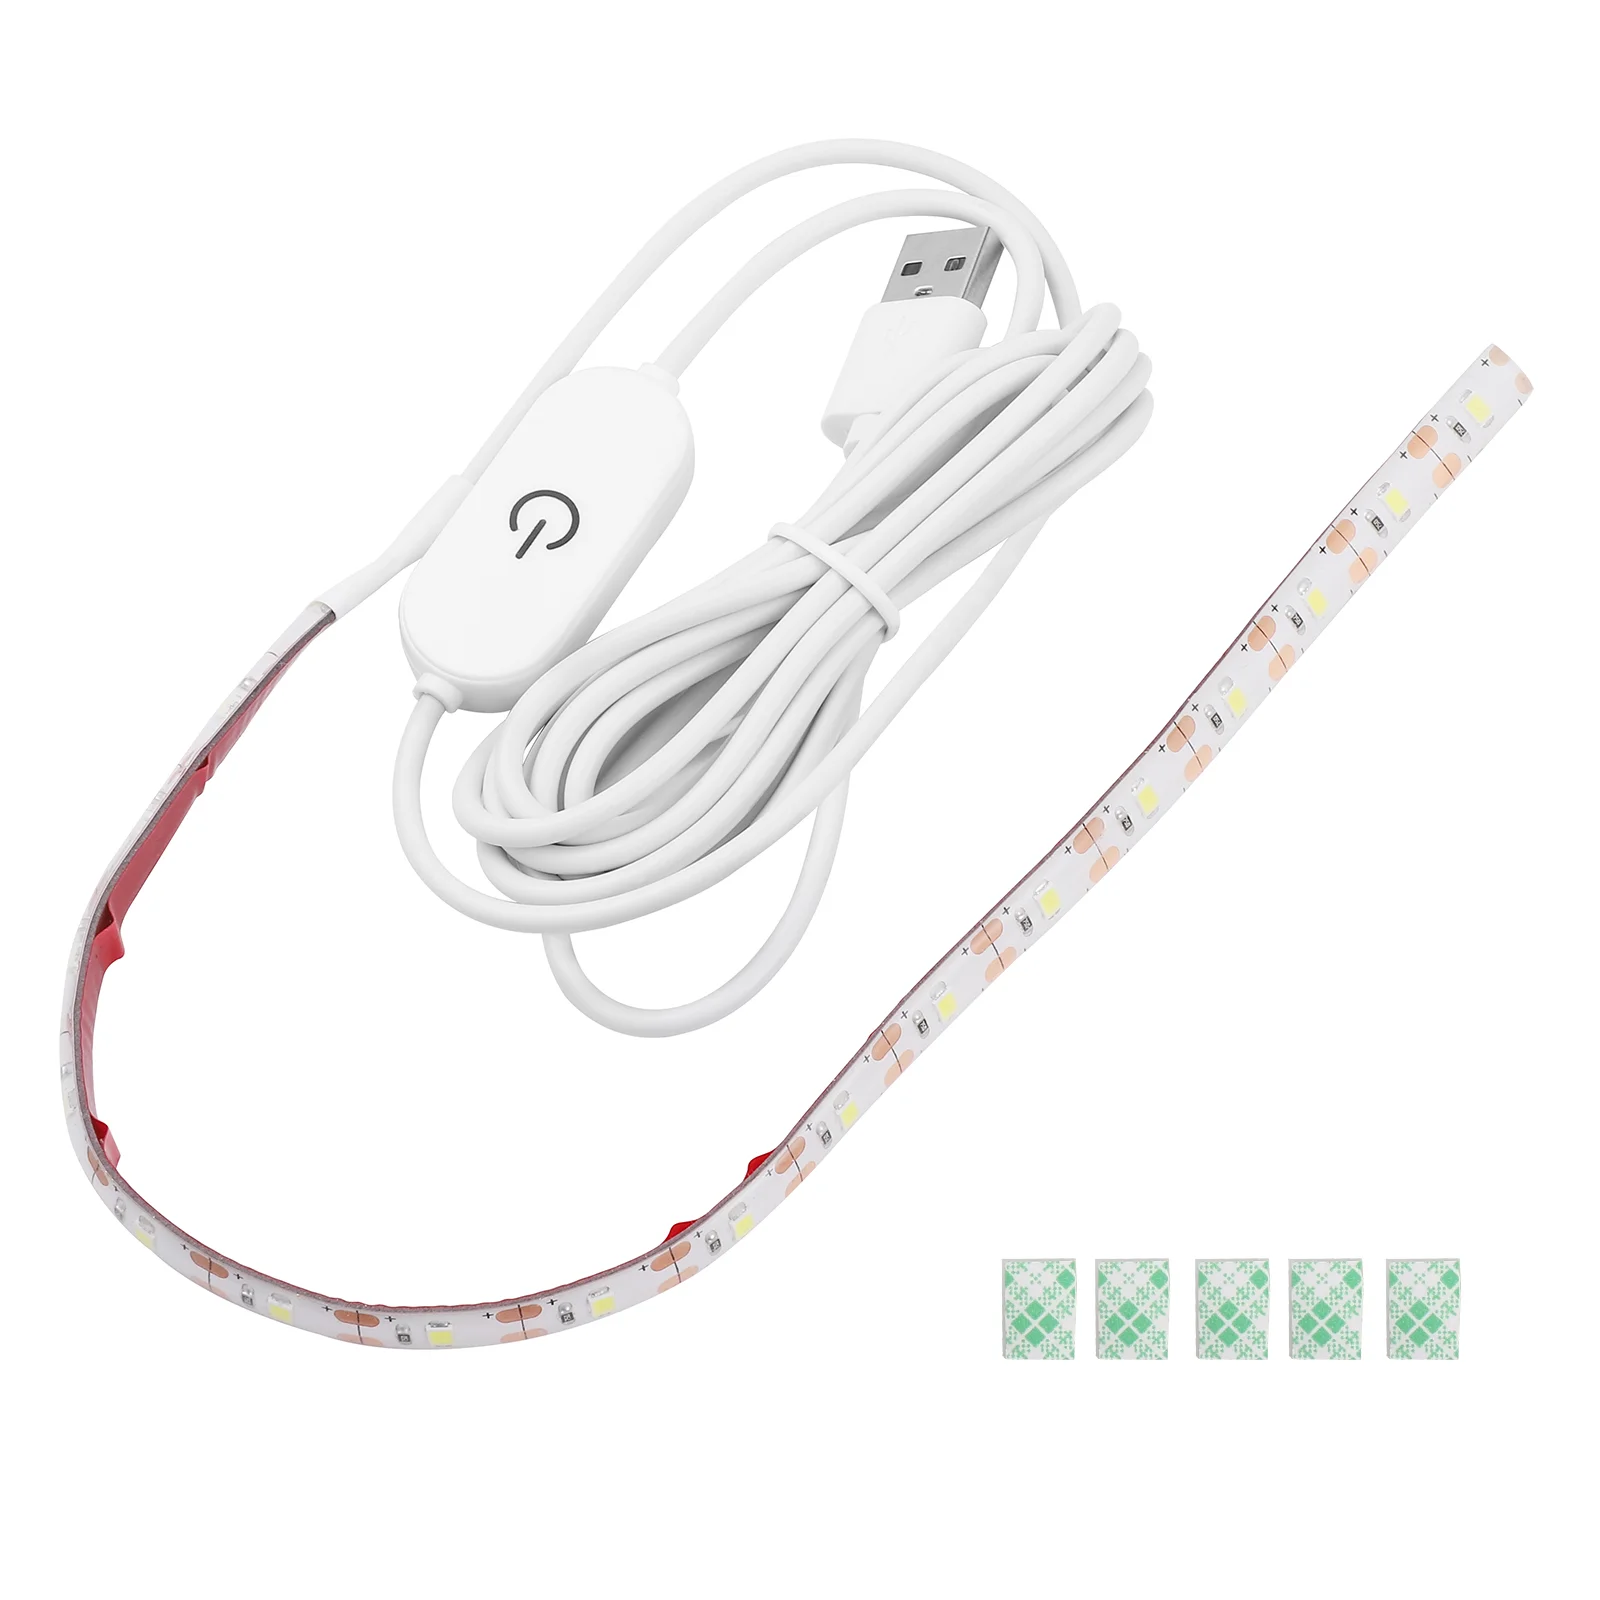 

Mobestech 2 Meters Portable Sewing Machine Light 5V USB 6500K Cold White LED Light Self-adhesive Light Strip with Touch Dimmer